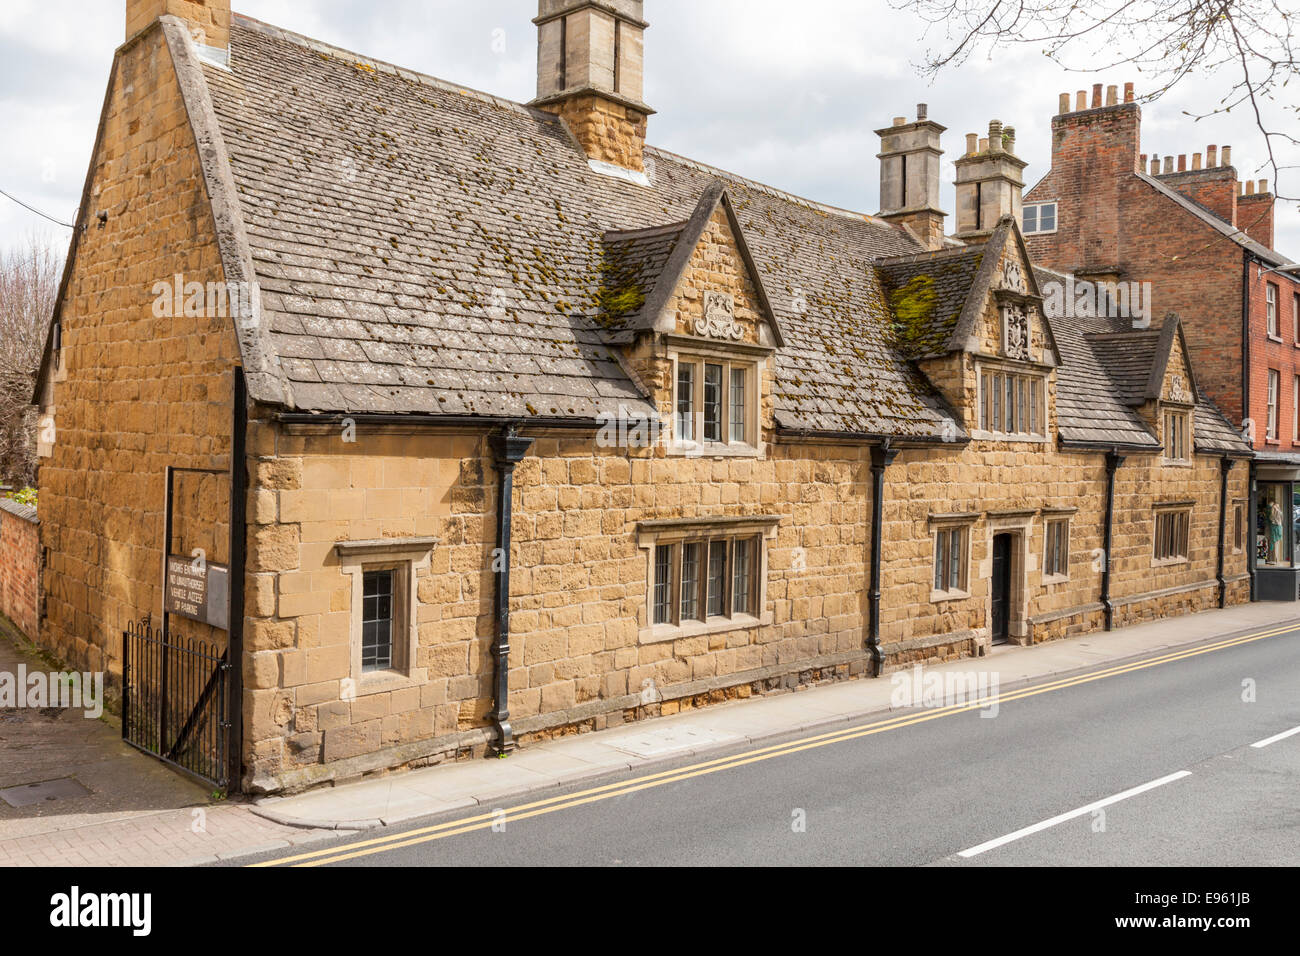 The Grade II listed 17th century Almshouses, known as Maison Dieu Bedehouses, Melton Mowbray, Leicestershire, England, UK Stock Photo